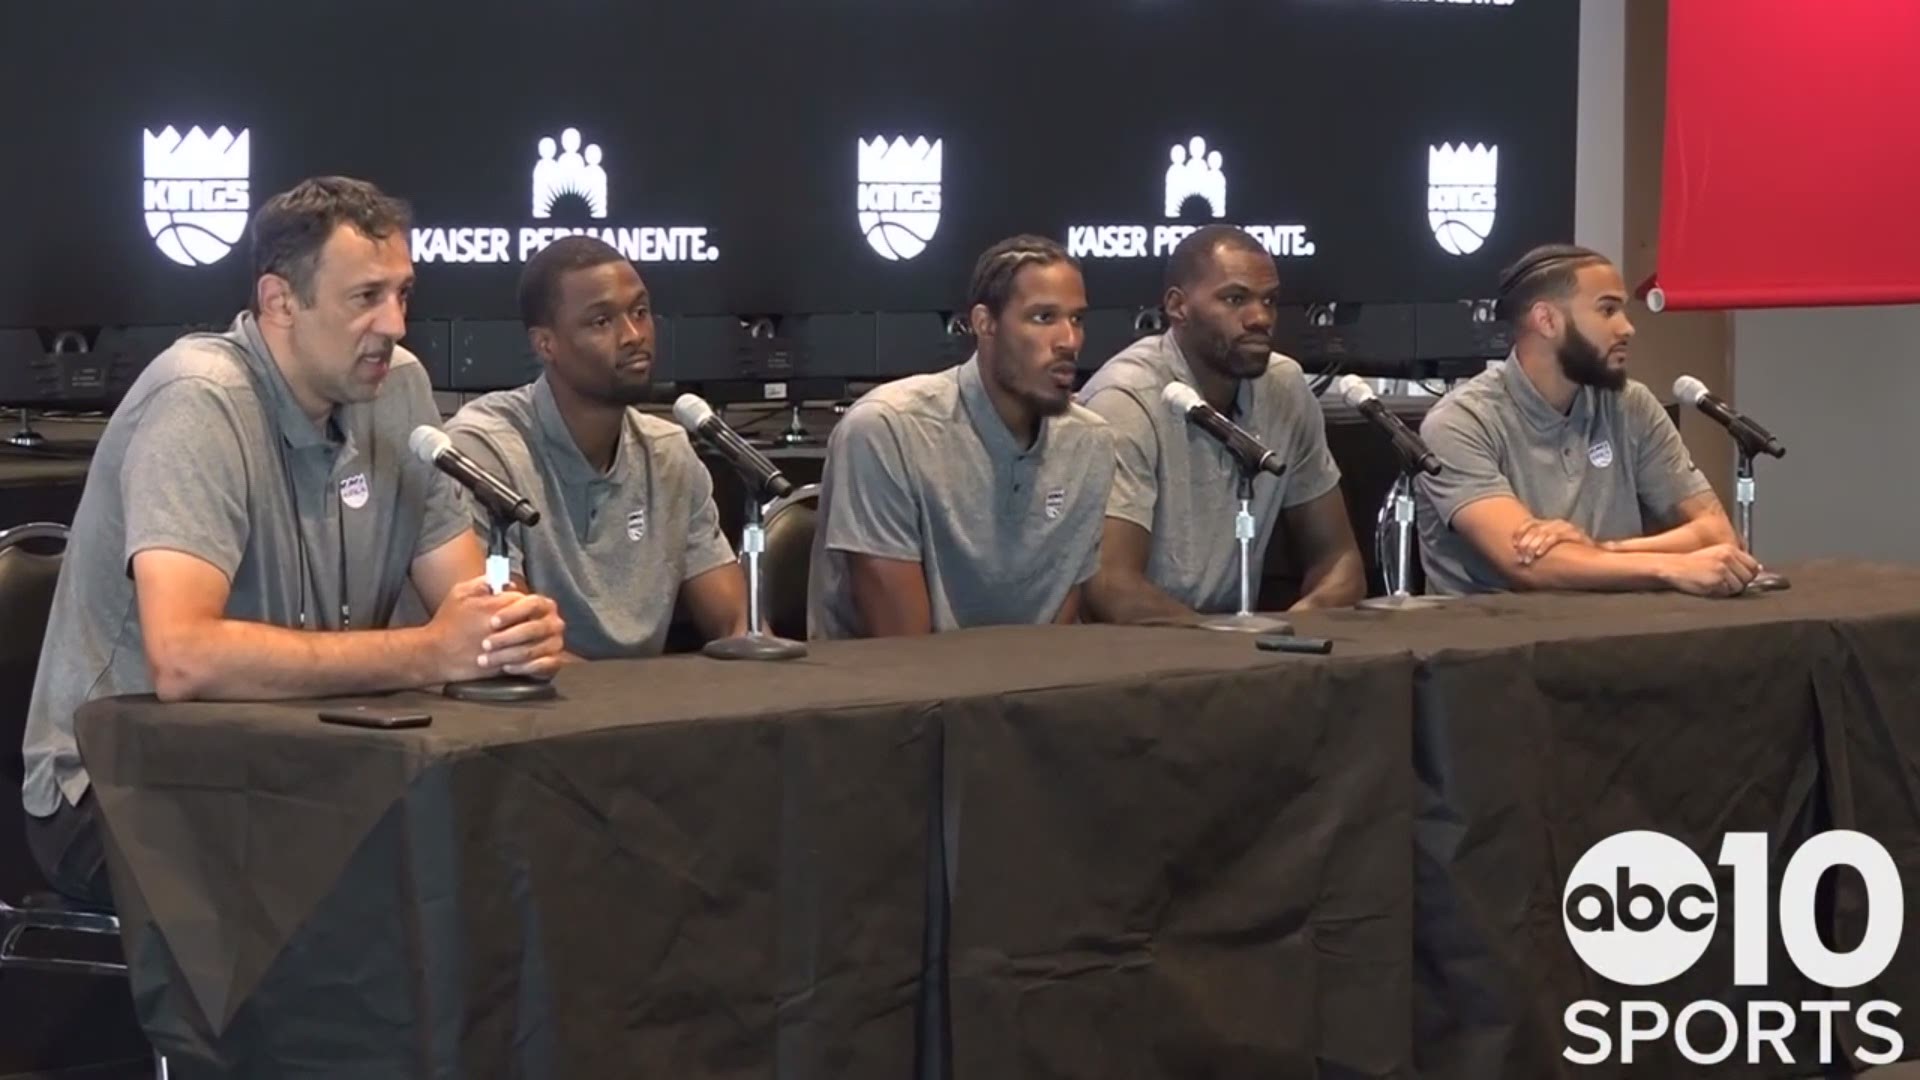 The Sacramento Kings general manager Vlade Divac introduces the team’s free agent signings Harrison Barnes, Trevor Ariza, Dewayne Dedmon and Cory Joseph during a press conference at Thomas & Mack Center in Las Vegas.